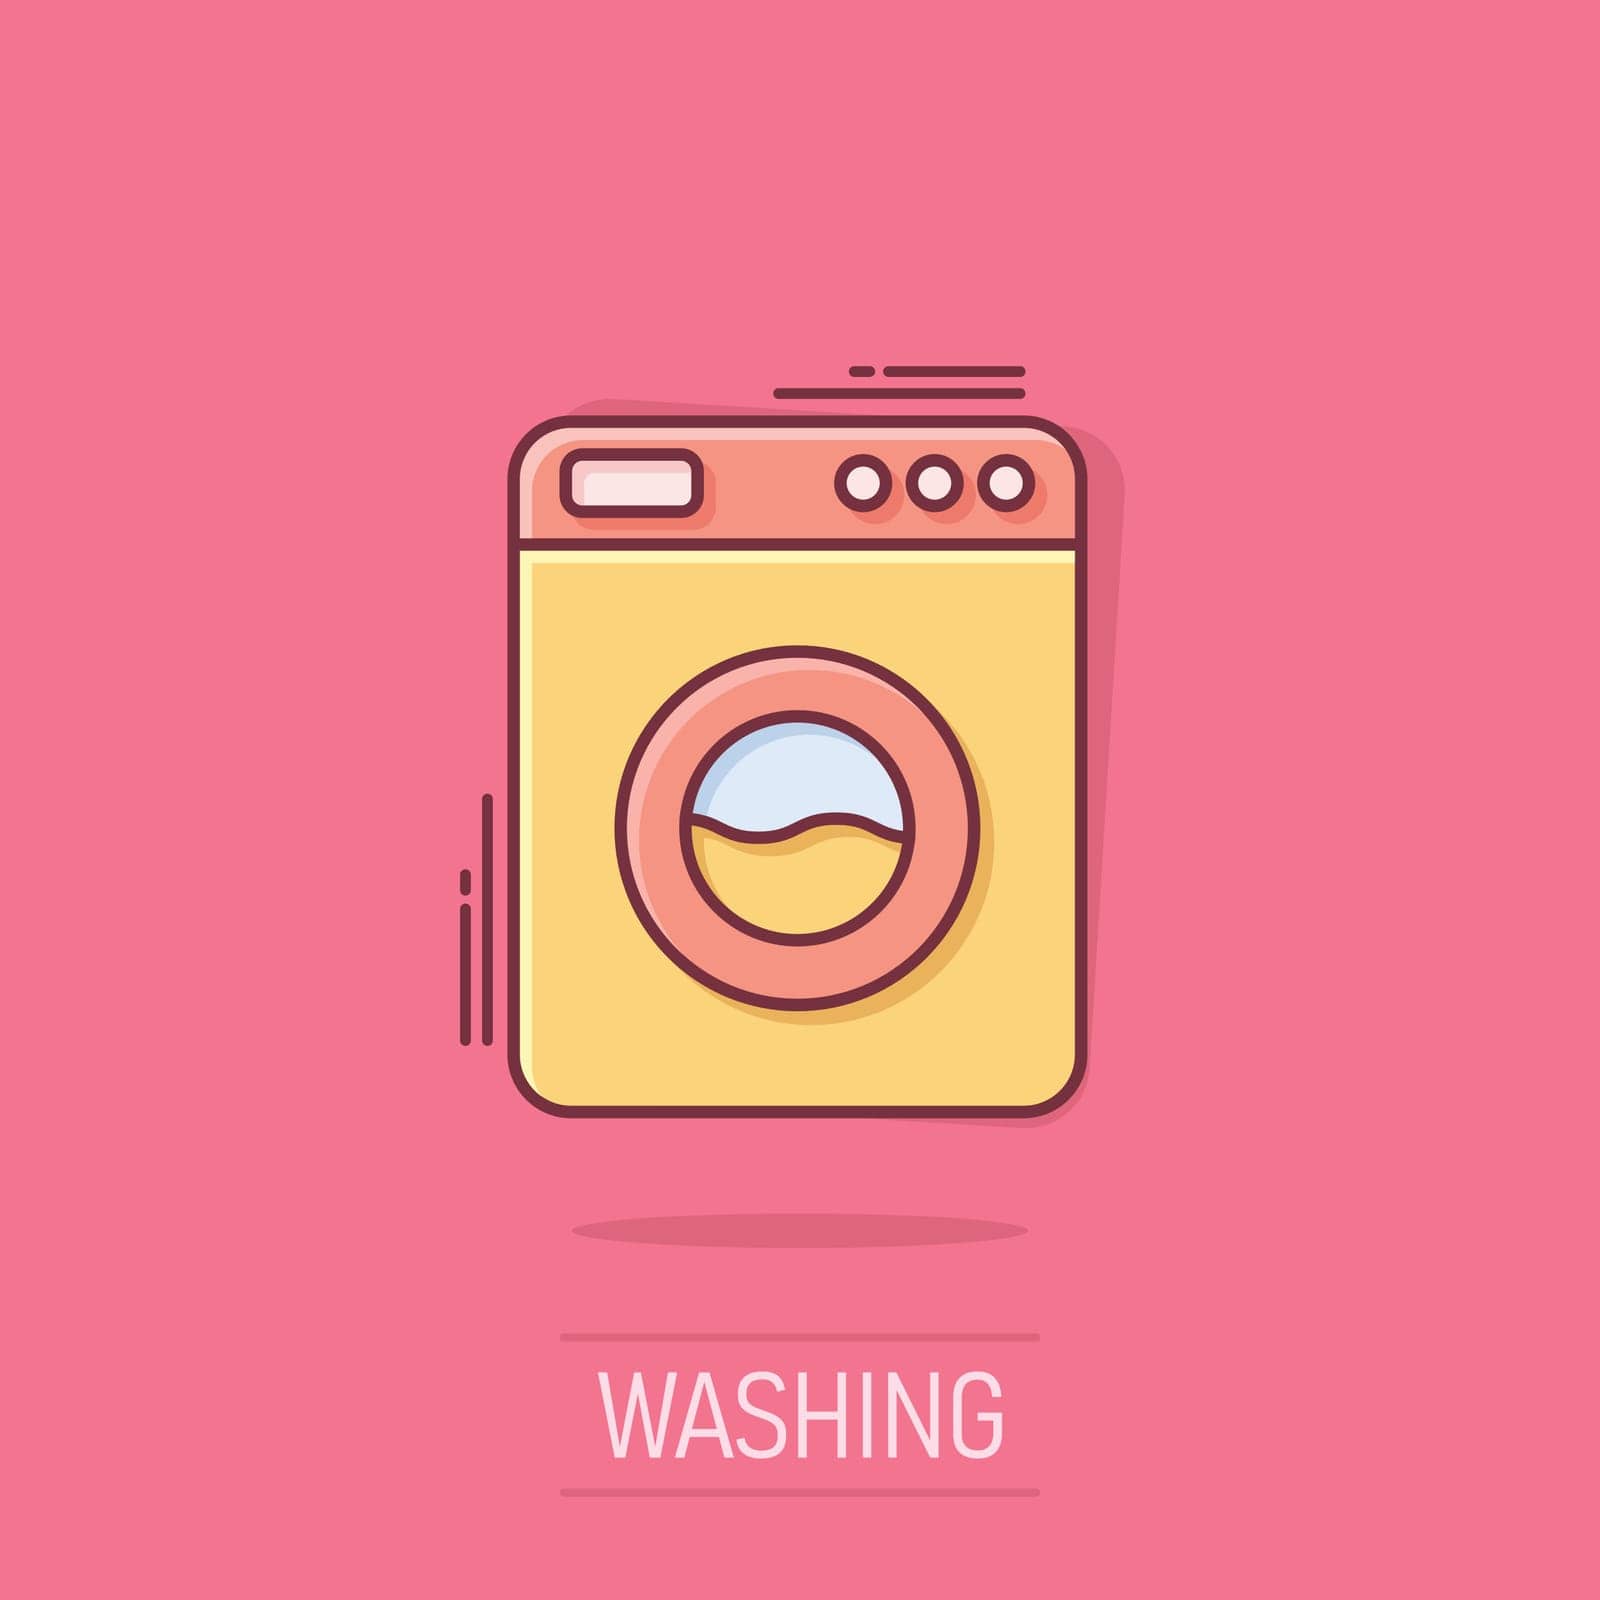 Washing machine icon in comic style. Washer cartoon vector illustration on isolated background. Laundry splash effect business concept. by LysenkoA